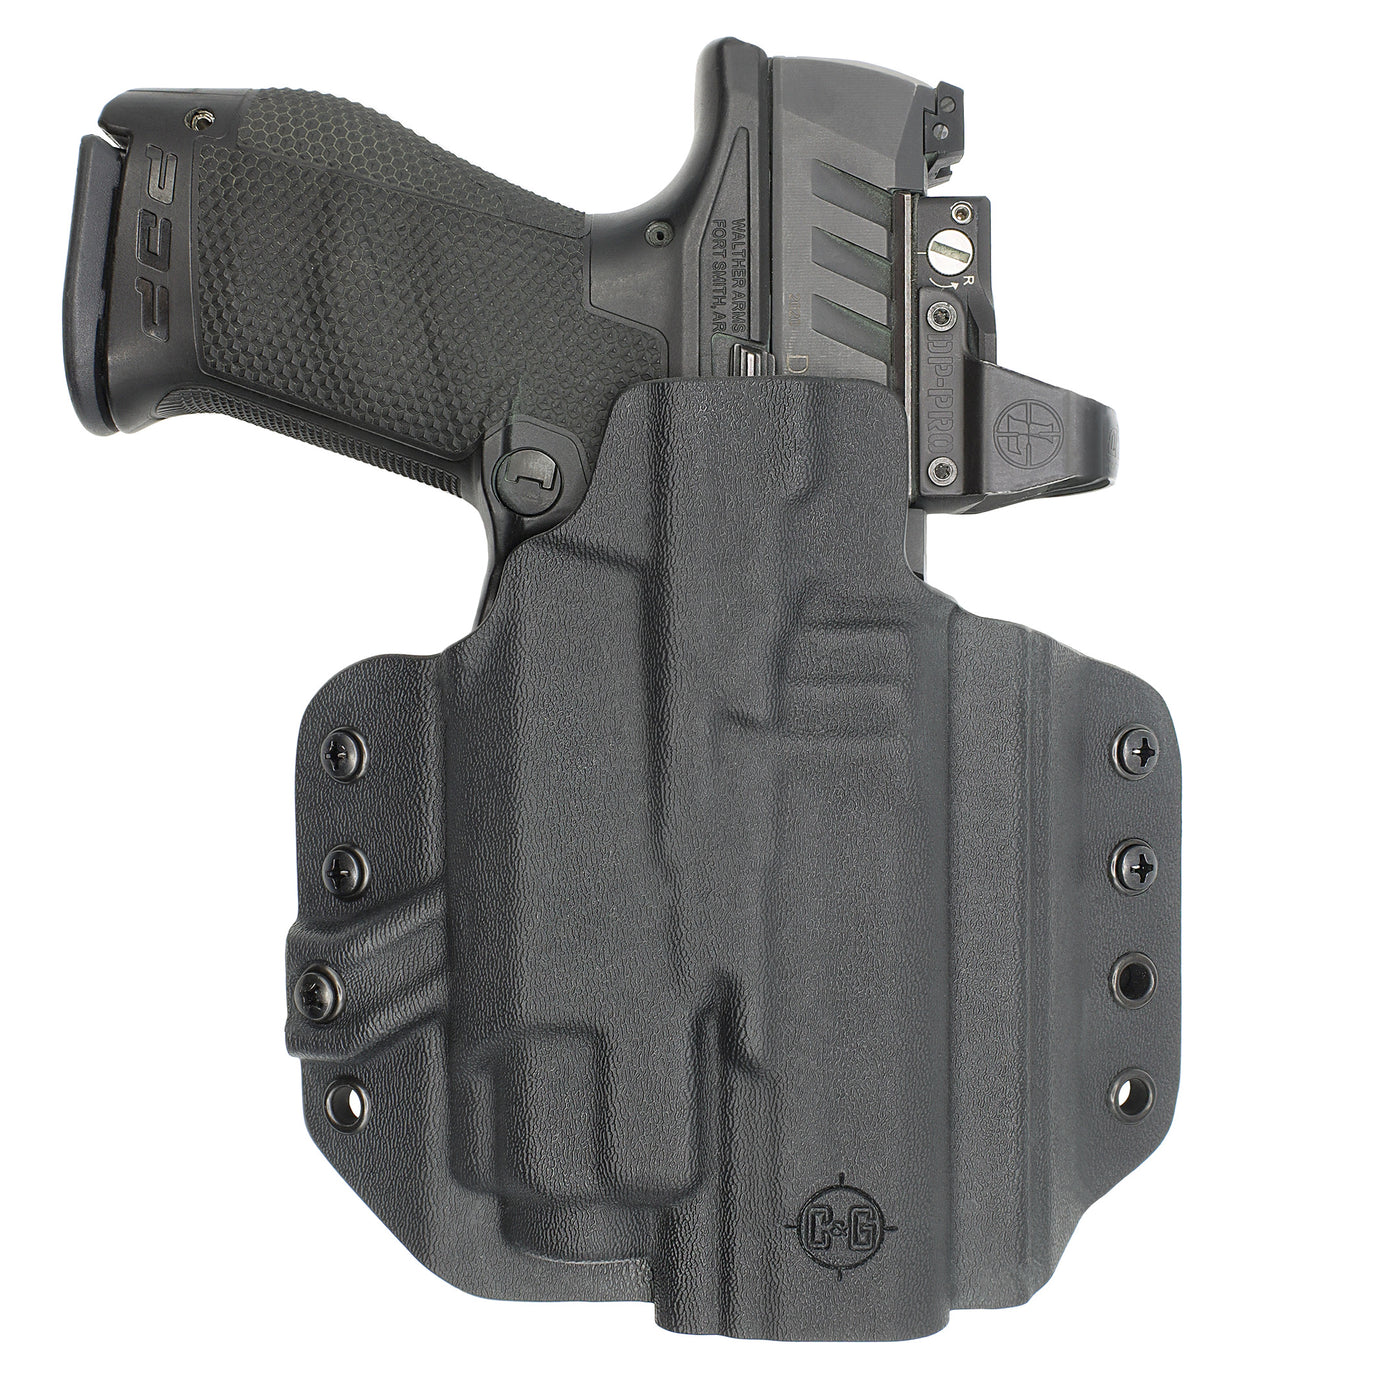 C&G Holsters custom OWB tactical M&P 9/40 streamlight TLR8 holstered